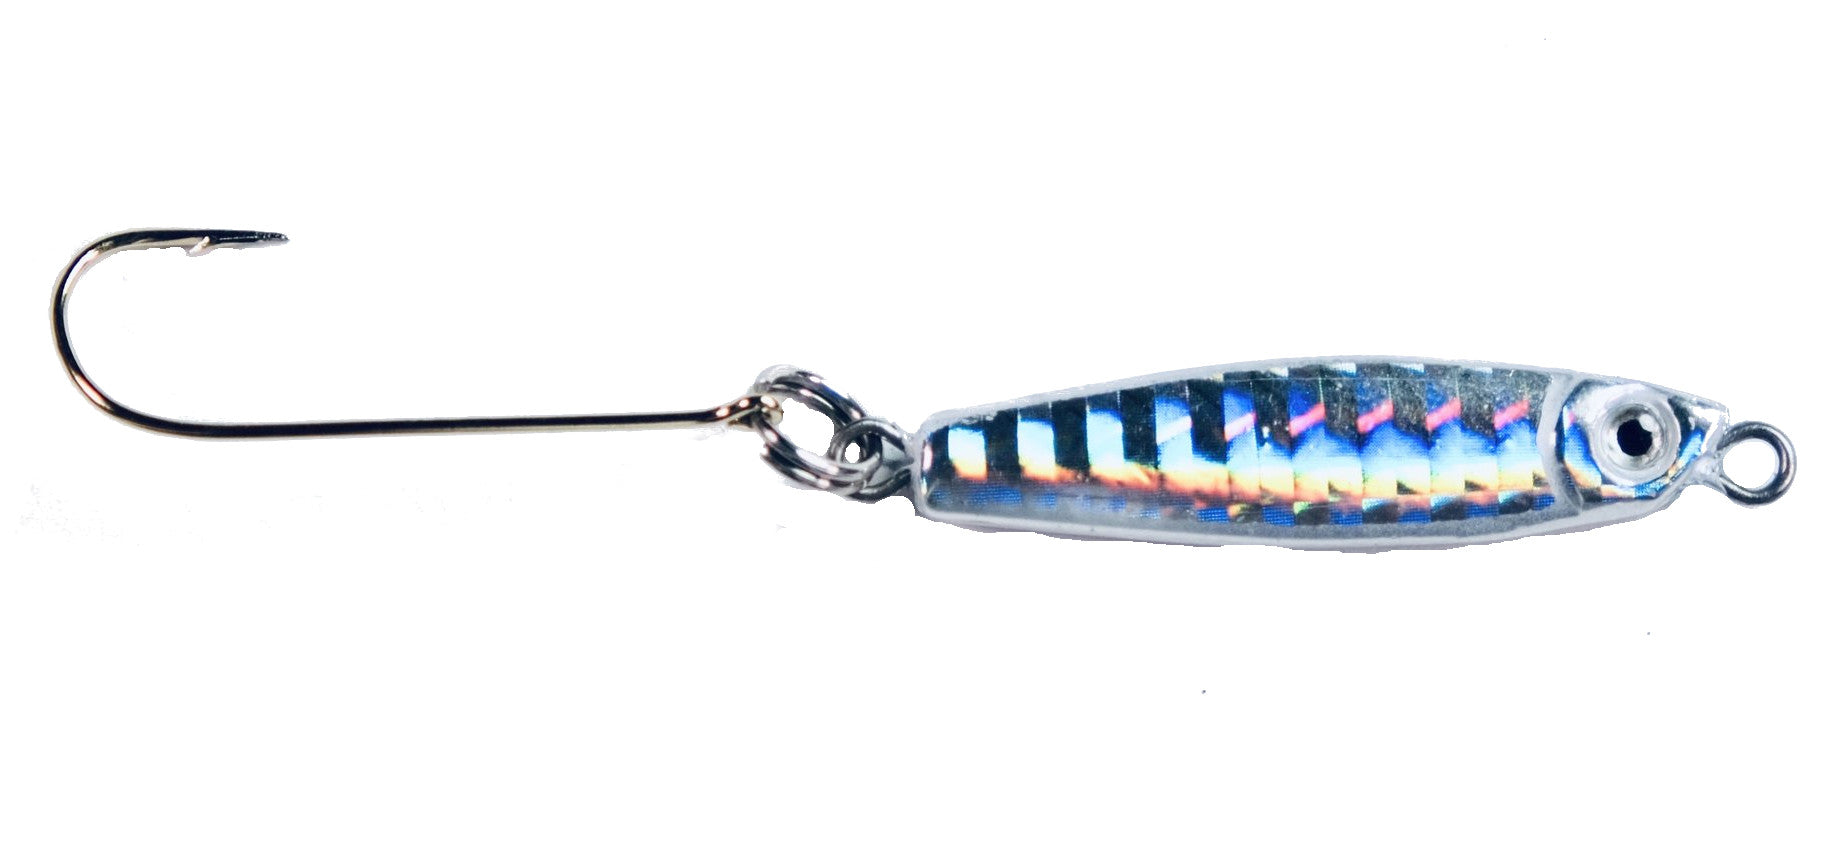 Only 2.79 usd for Jelifish Crappie Bomb Pro Snagless Jig Online at